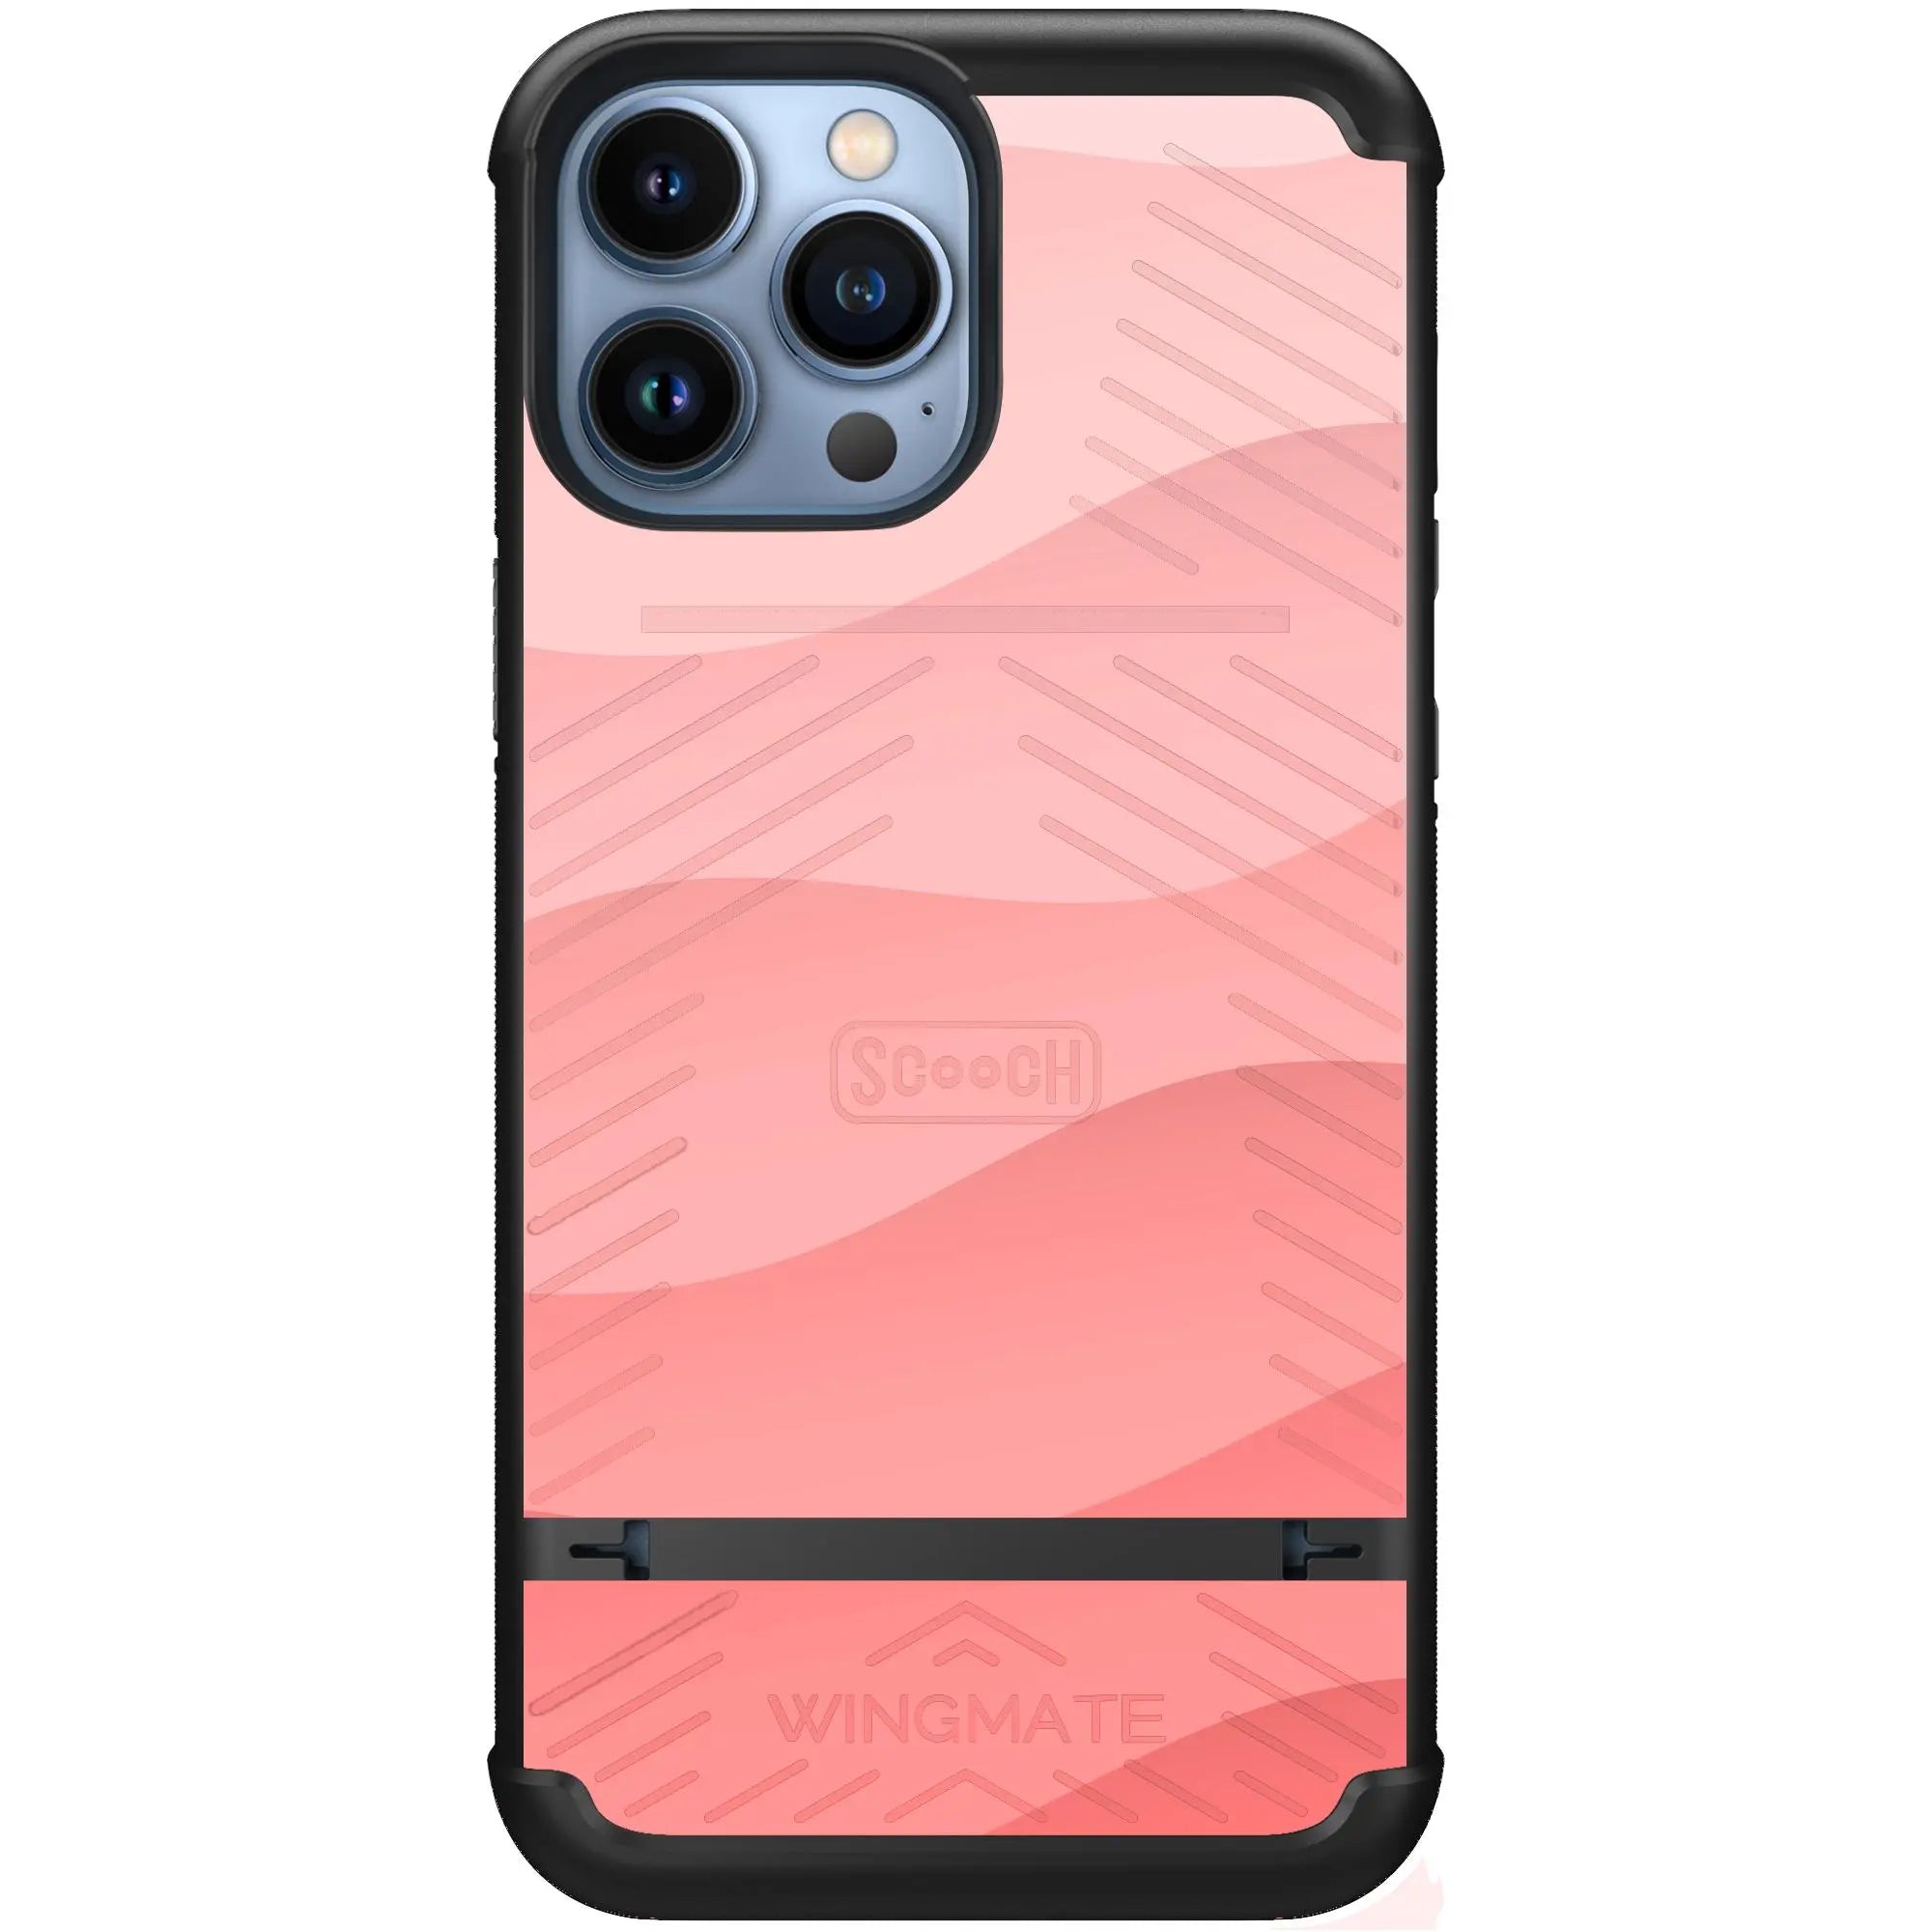 Scooch-Wingmate for iPhone 13 Pro Max-Pink-Waves